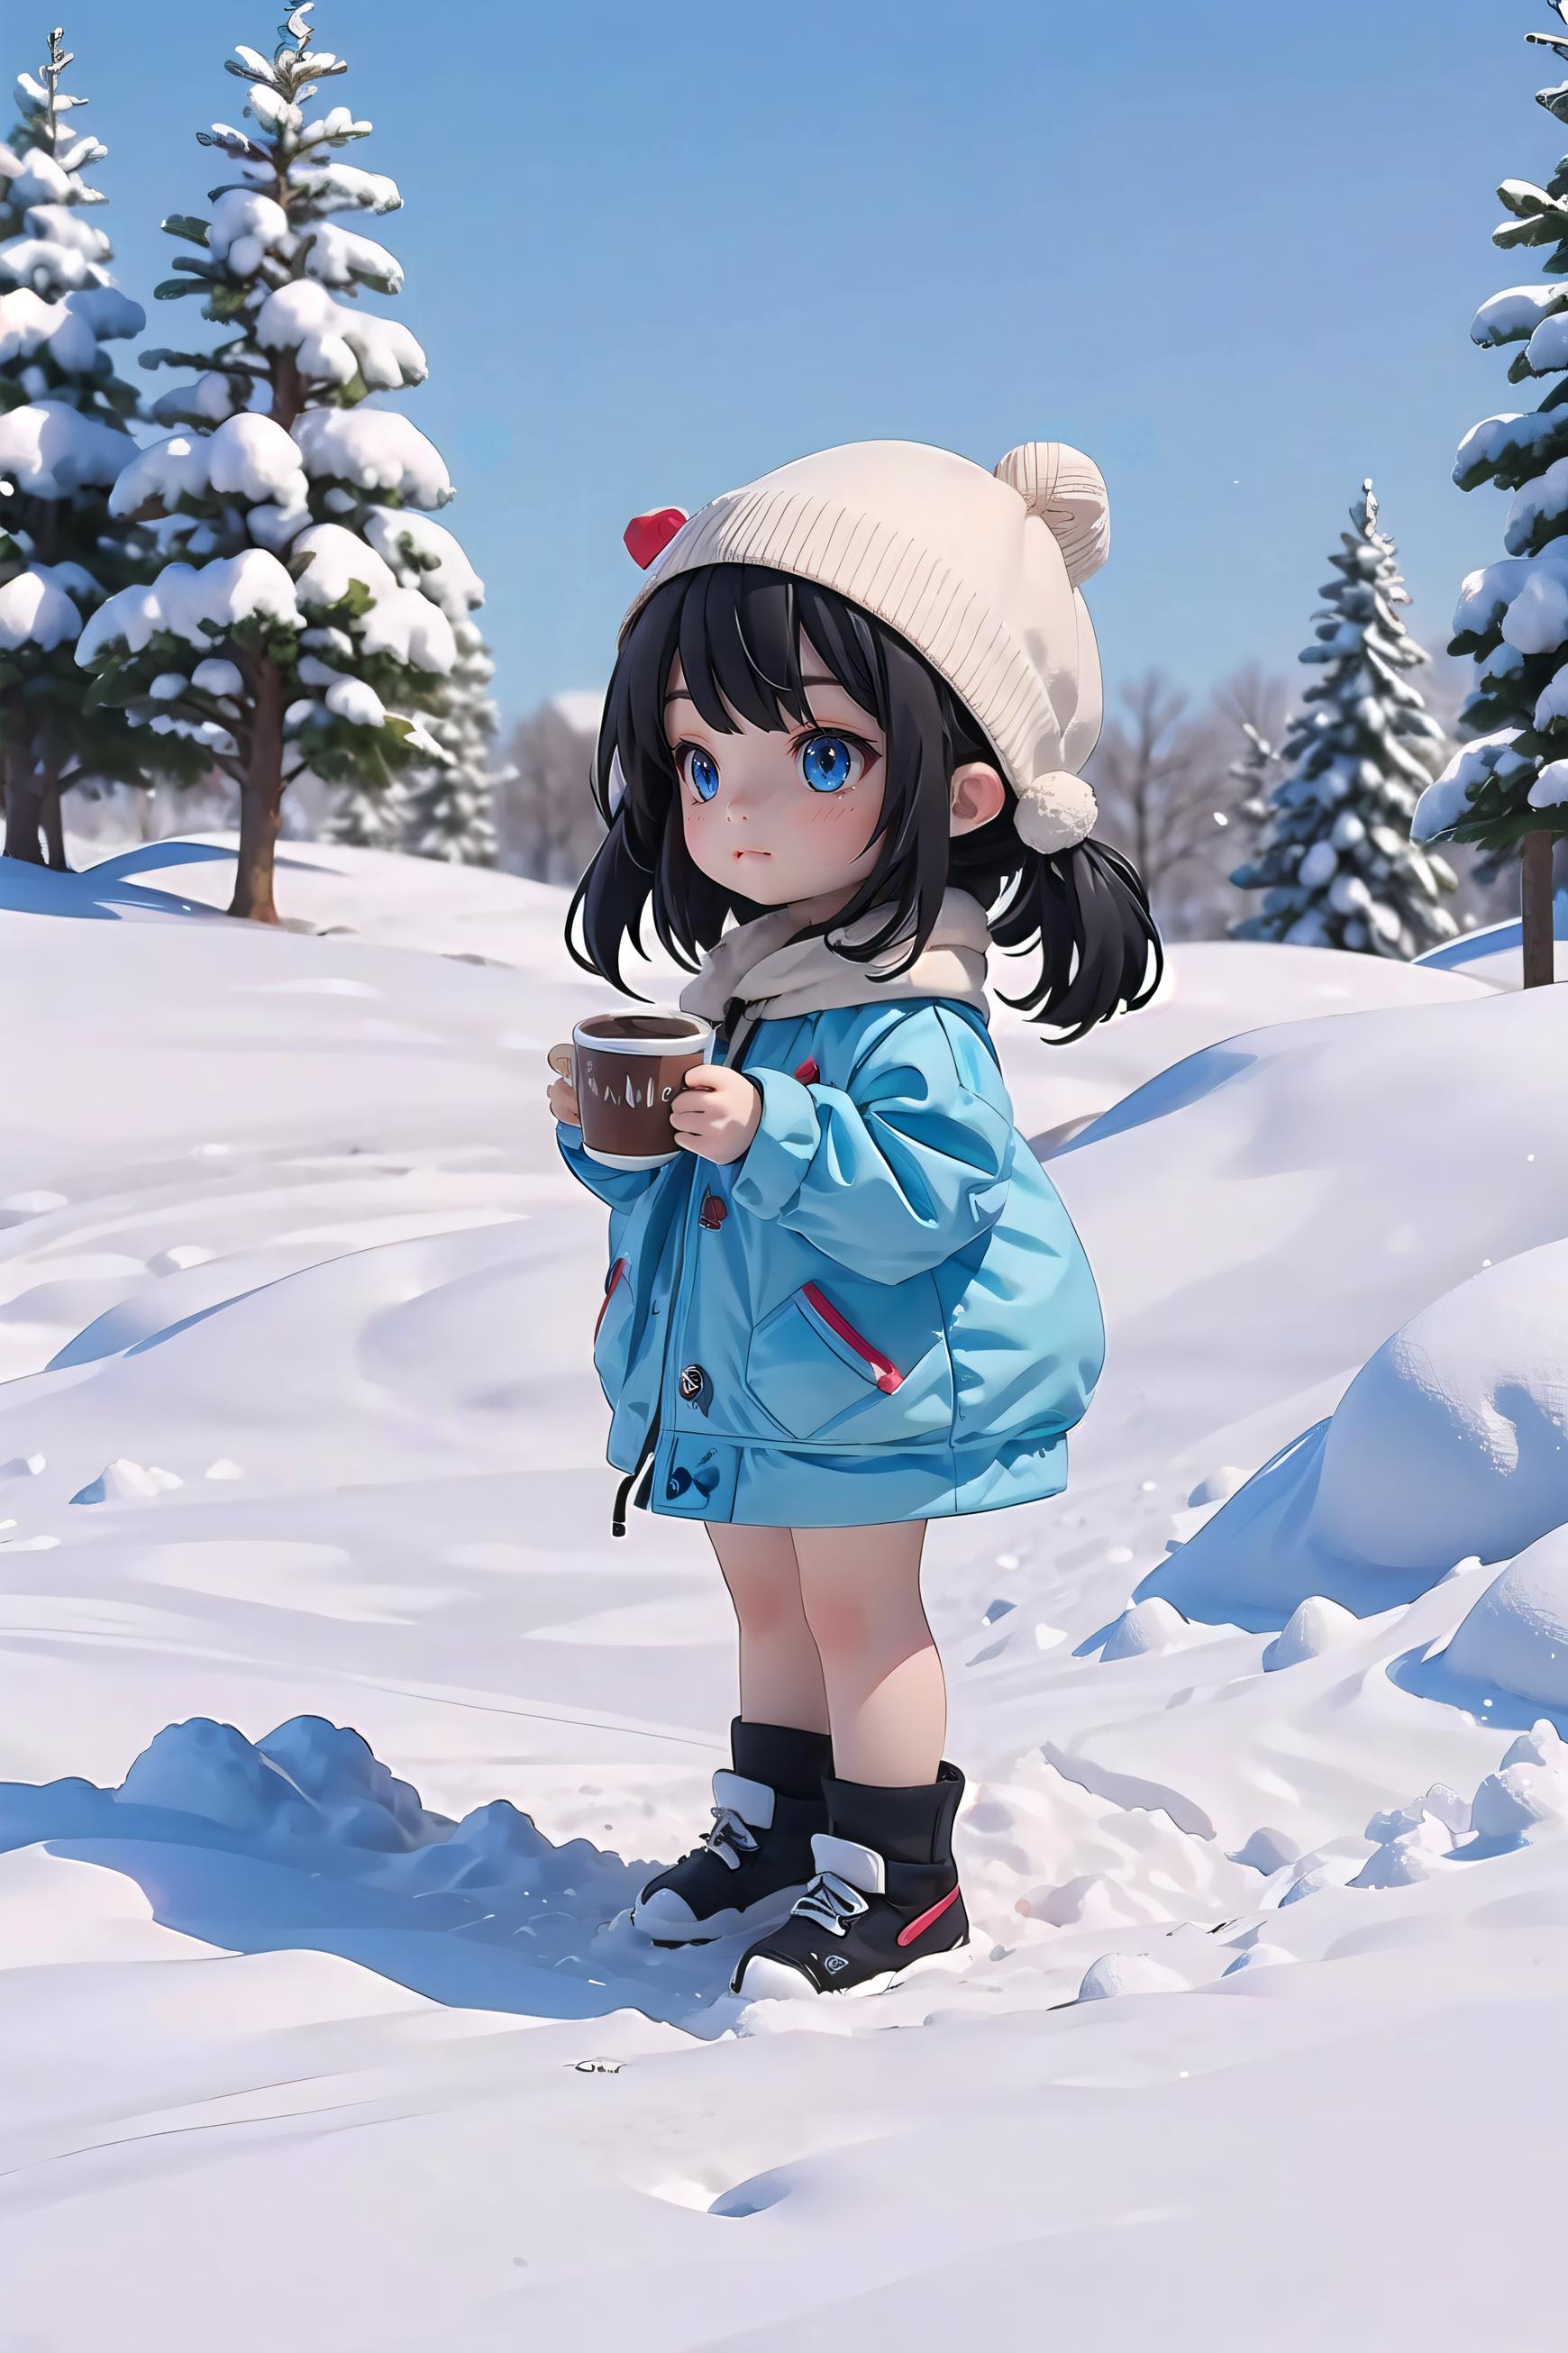 A cartoon girl wearing a blue jacket and white hat, standing in the snow and holding a coffee mug.